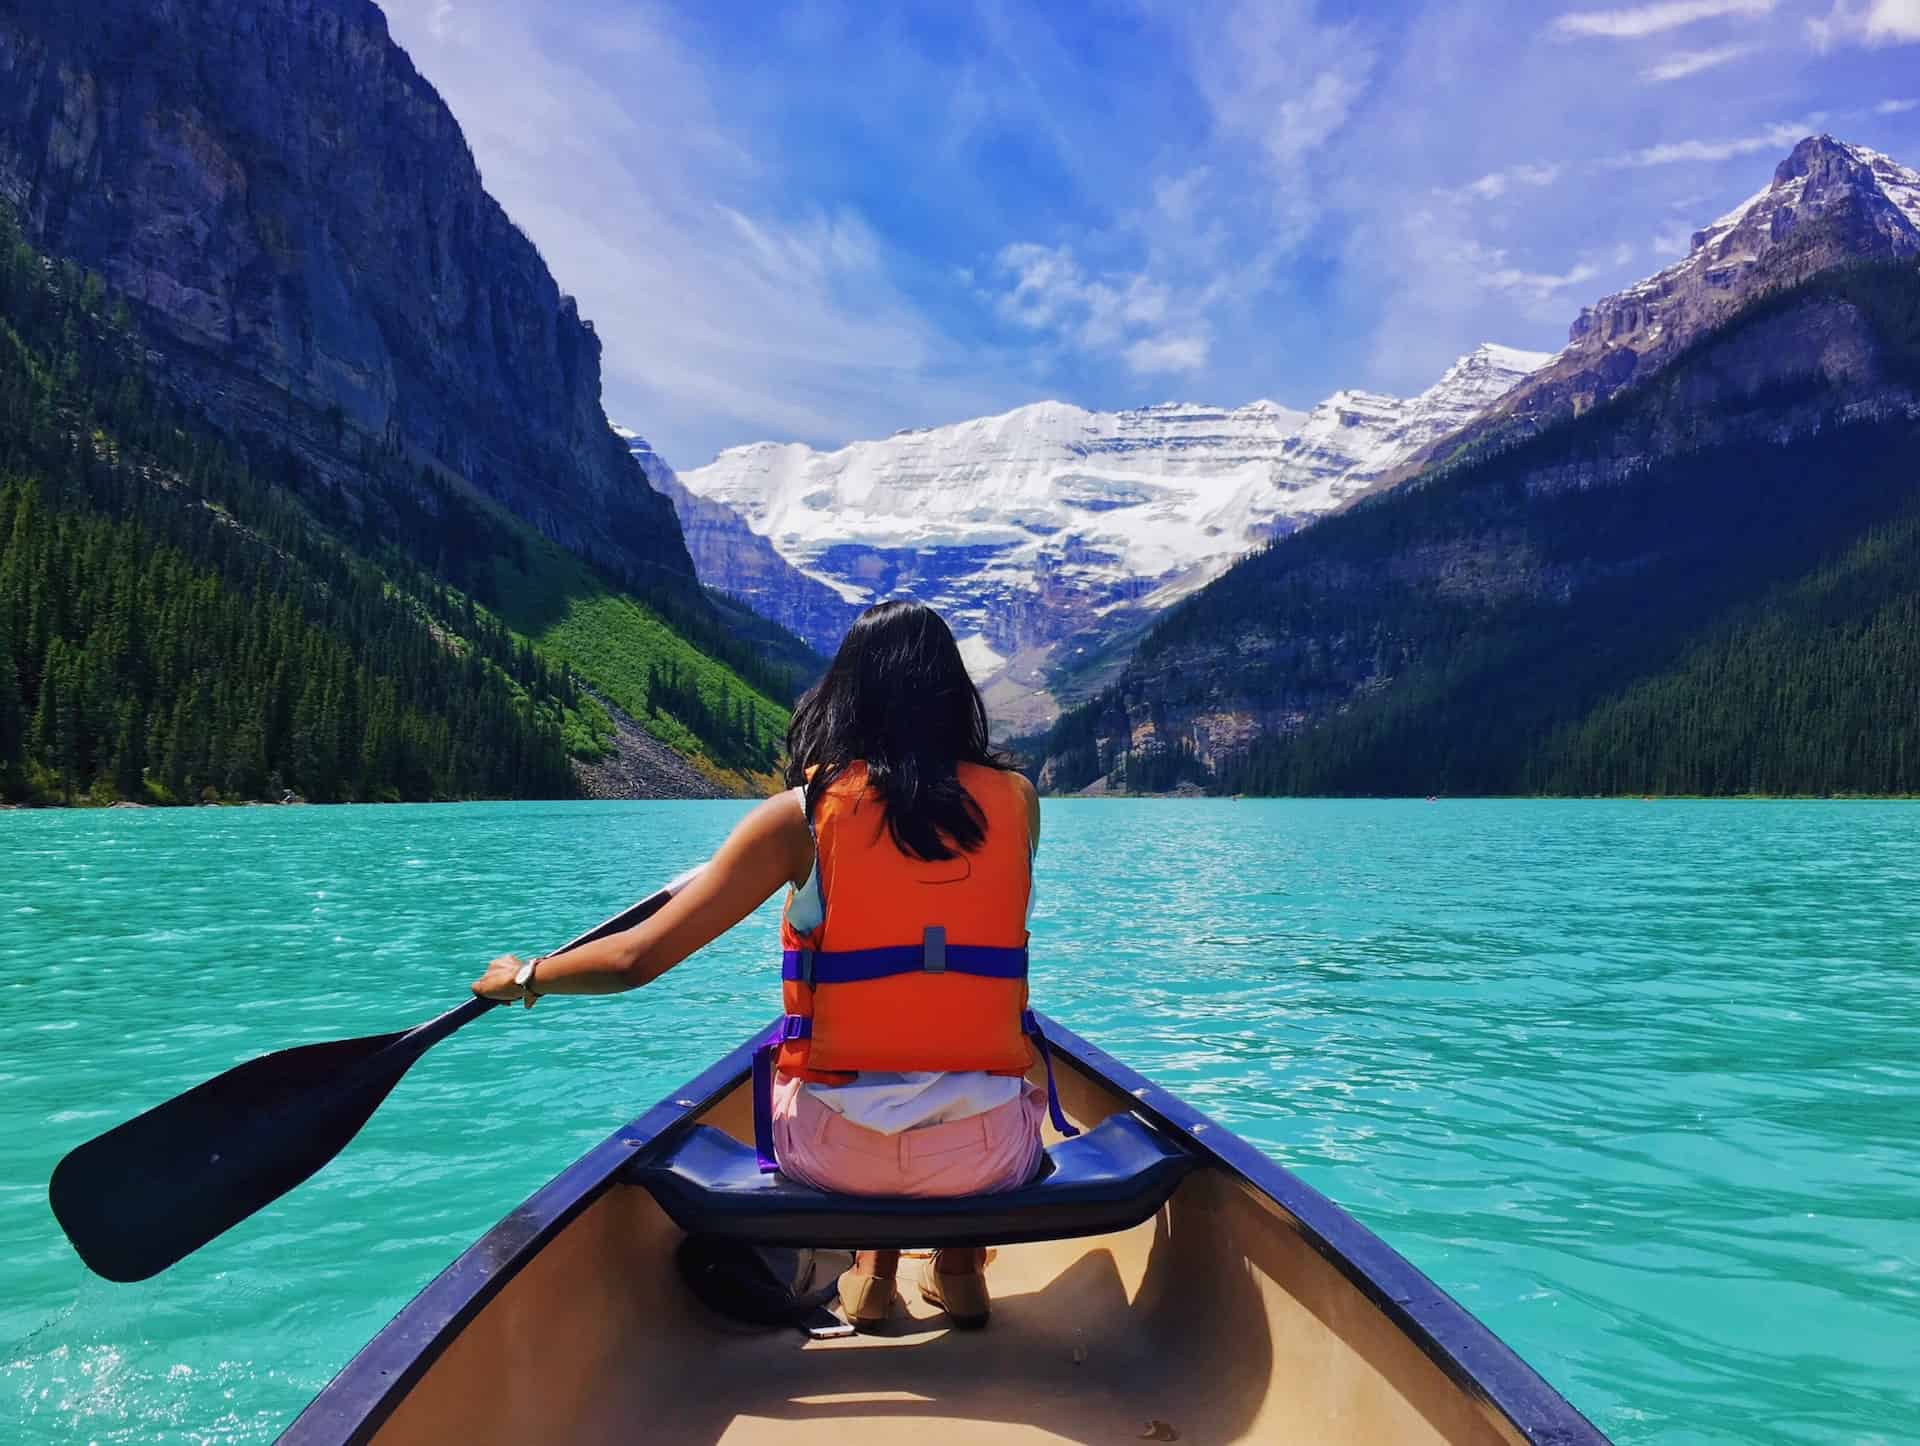 Canoeing – a great way to spend time actively!